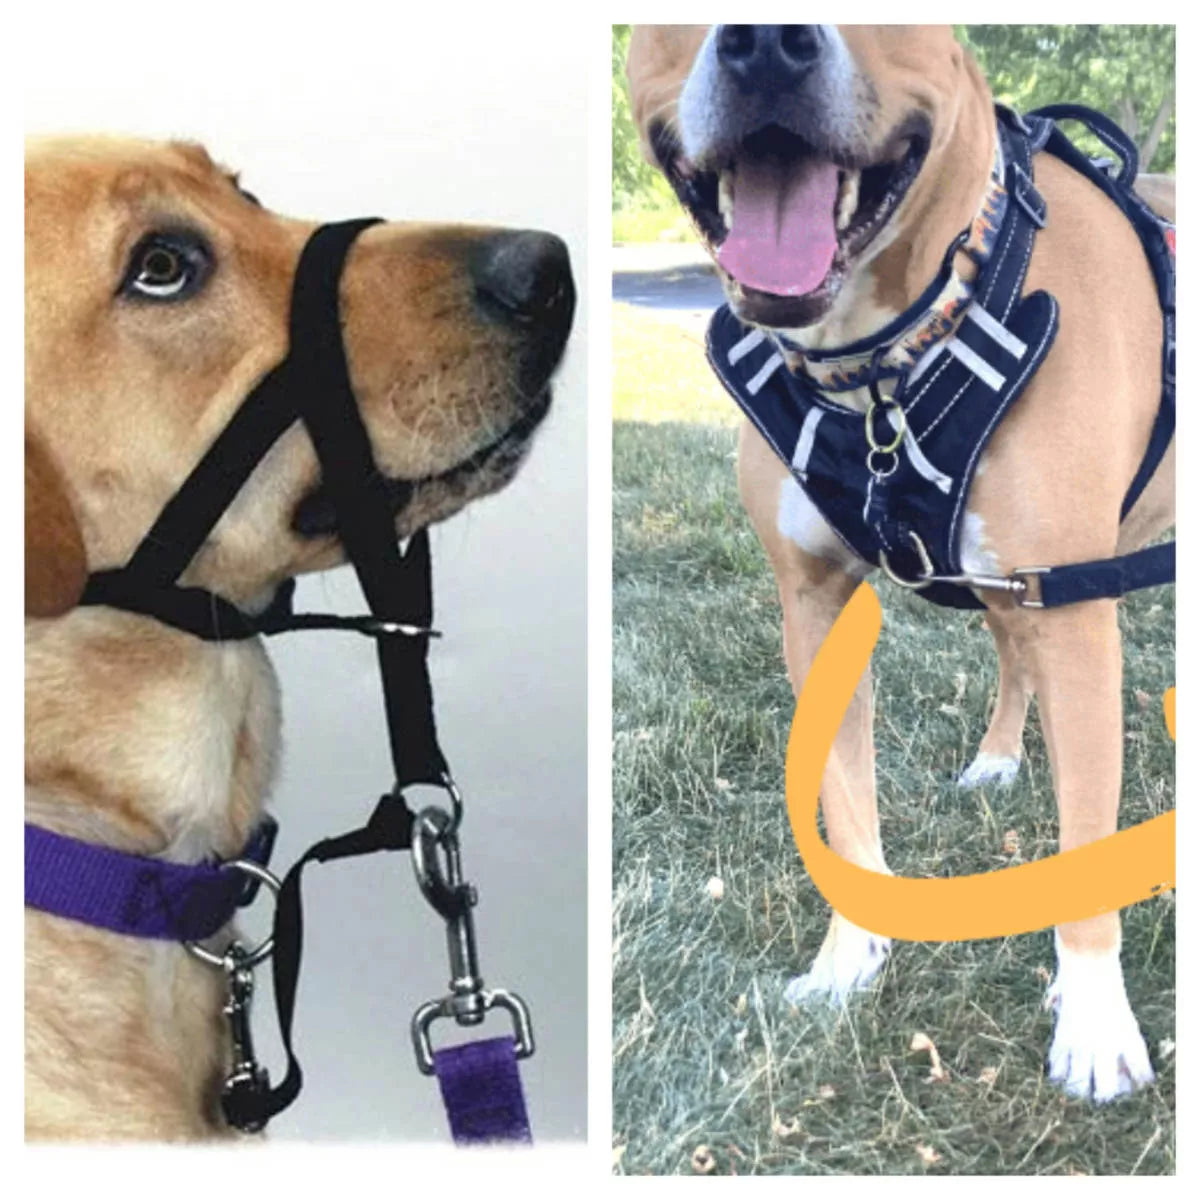 Head Halter or Front Clip Harness - which one is best? – wiggles and wags